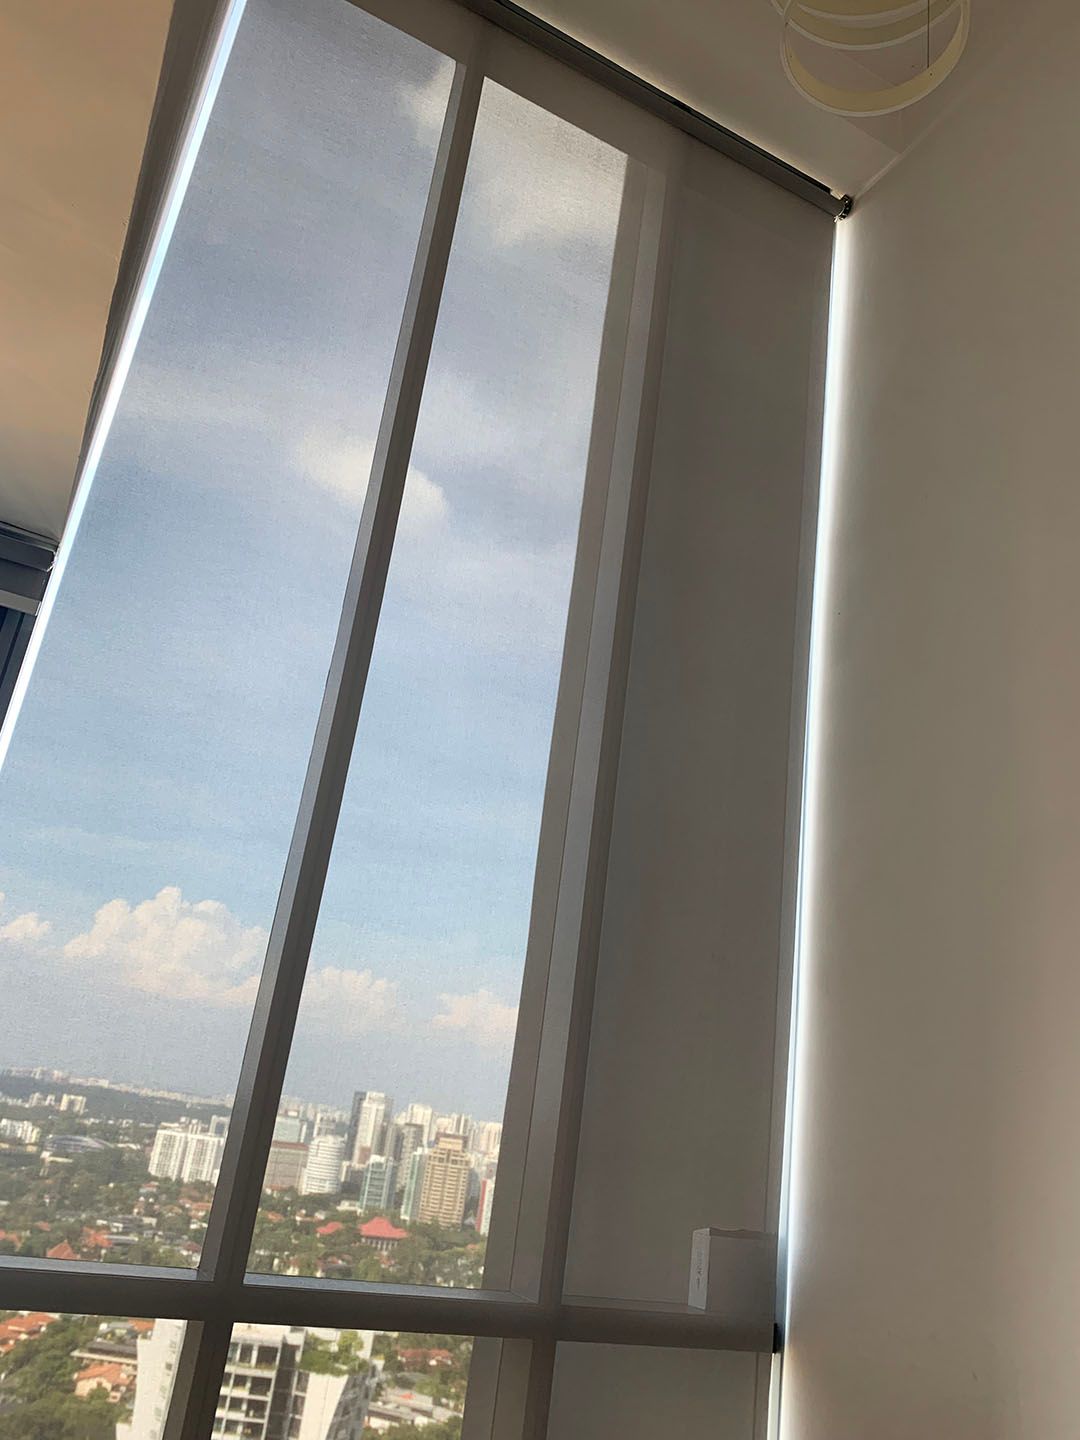 Motorised window blinds in an apartment with a high ceiling